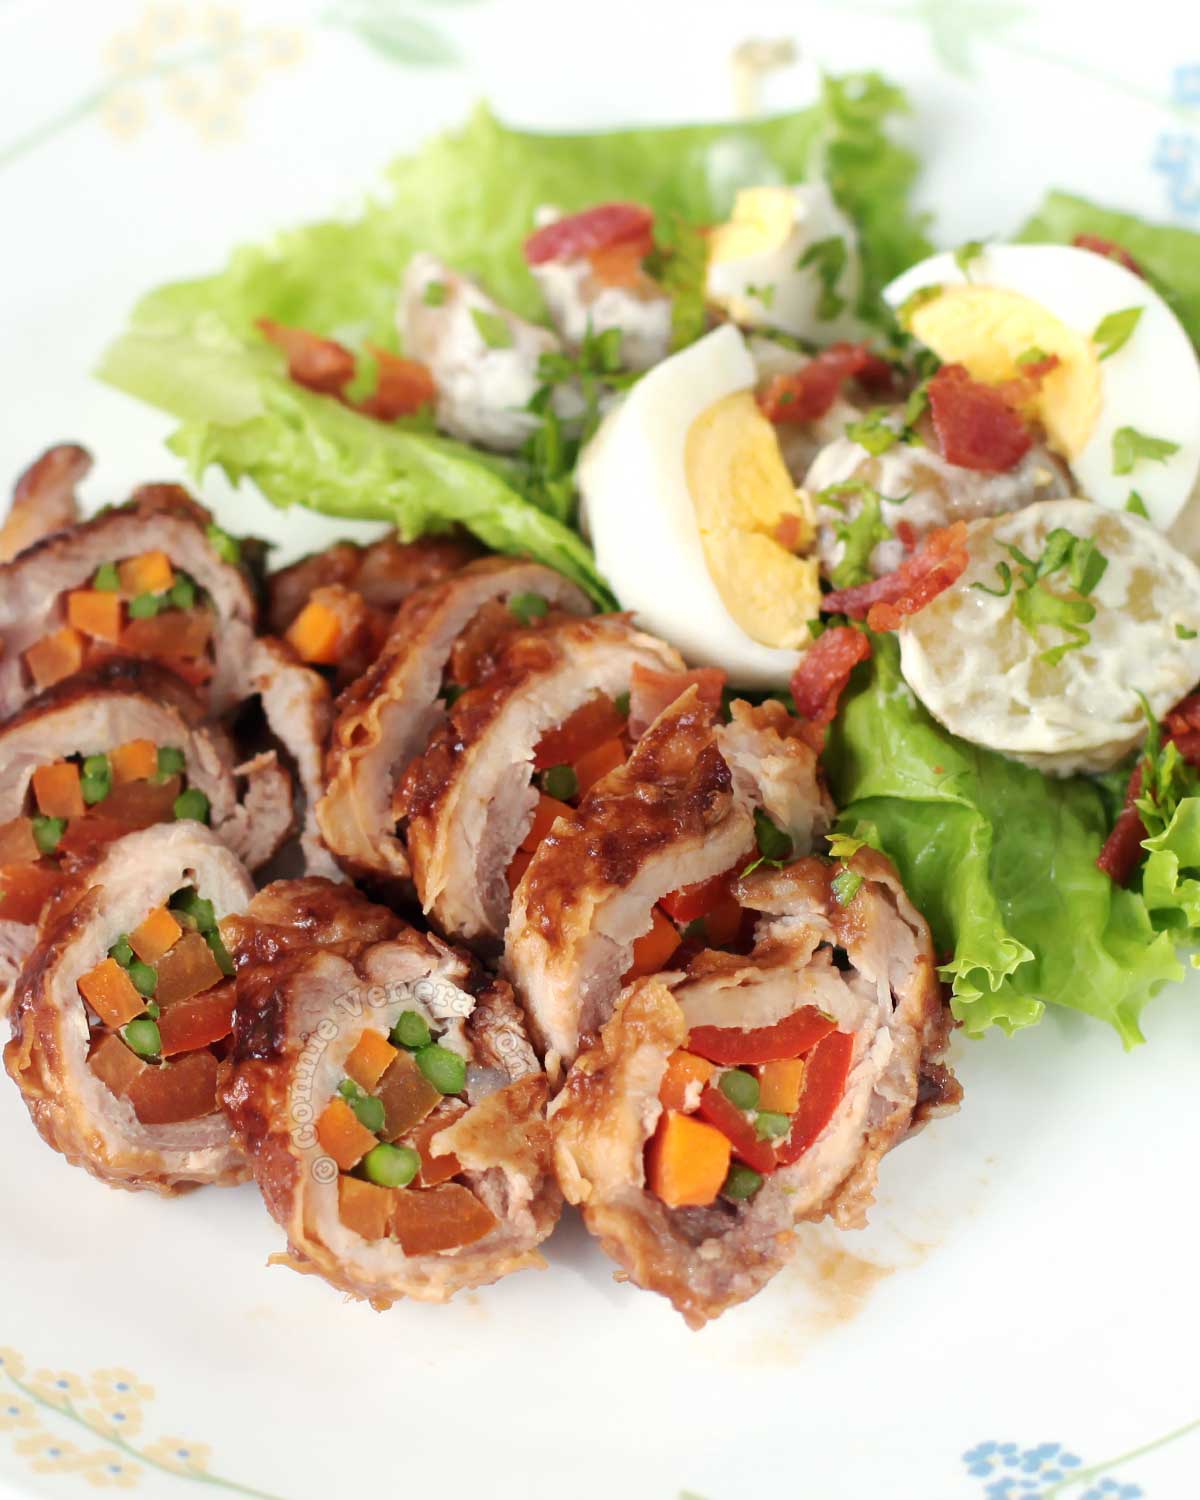 Stuffed and rolled pork loin with salad on plate